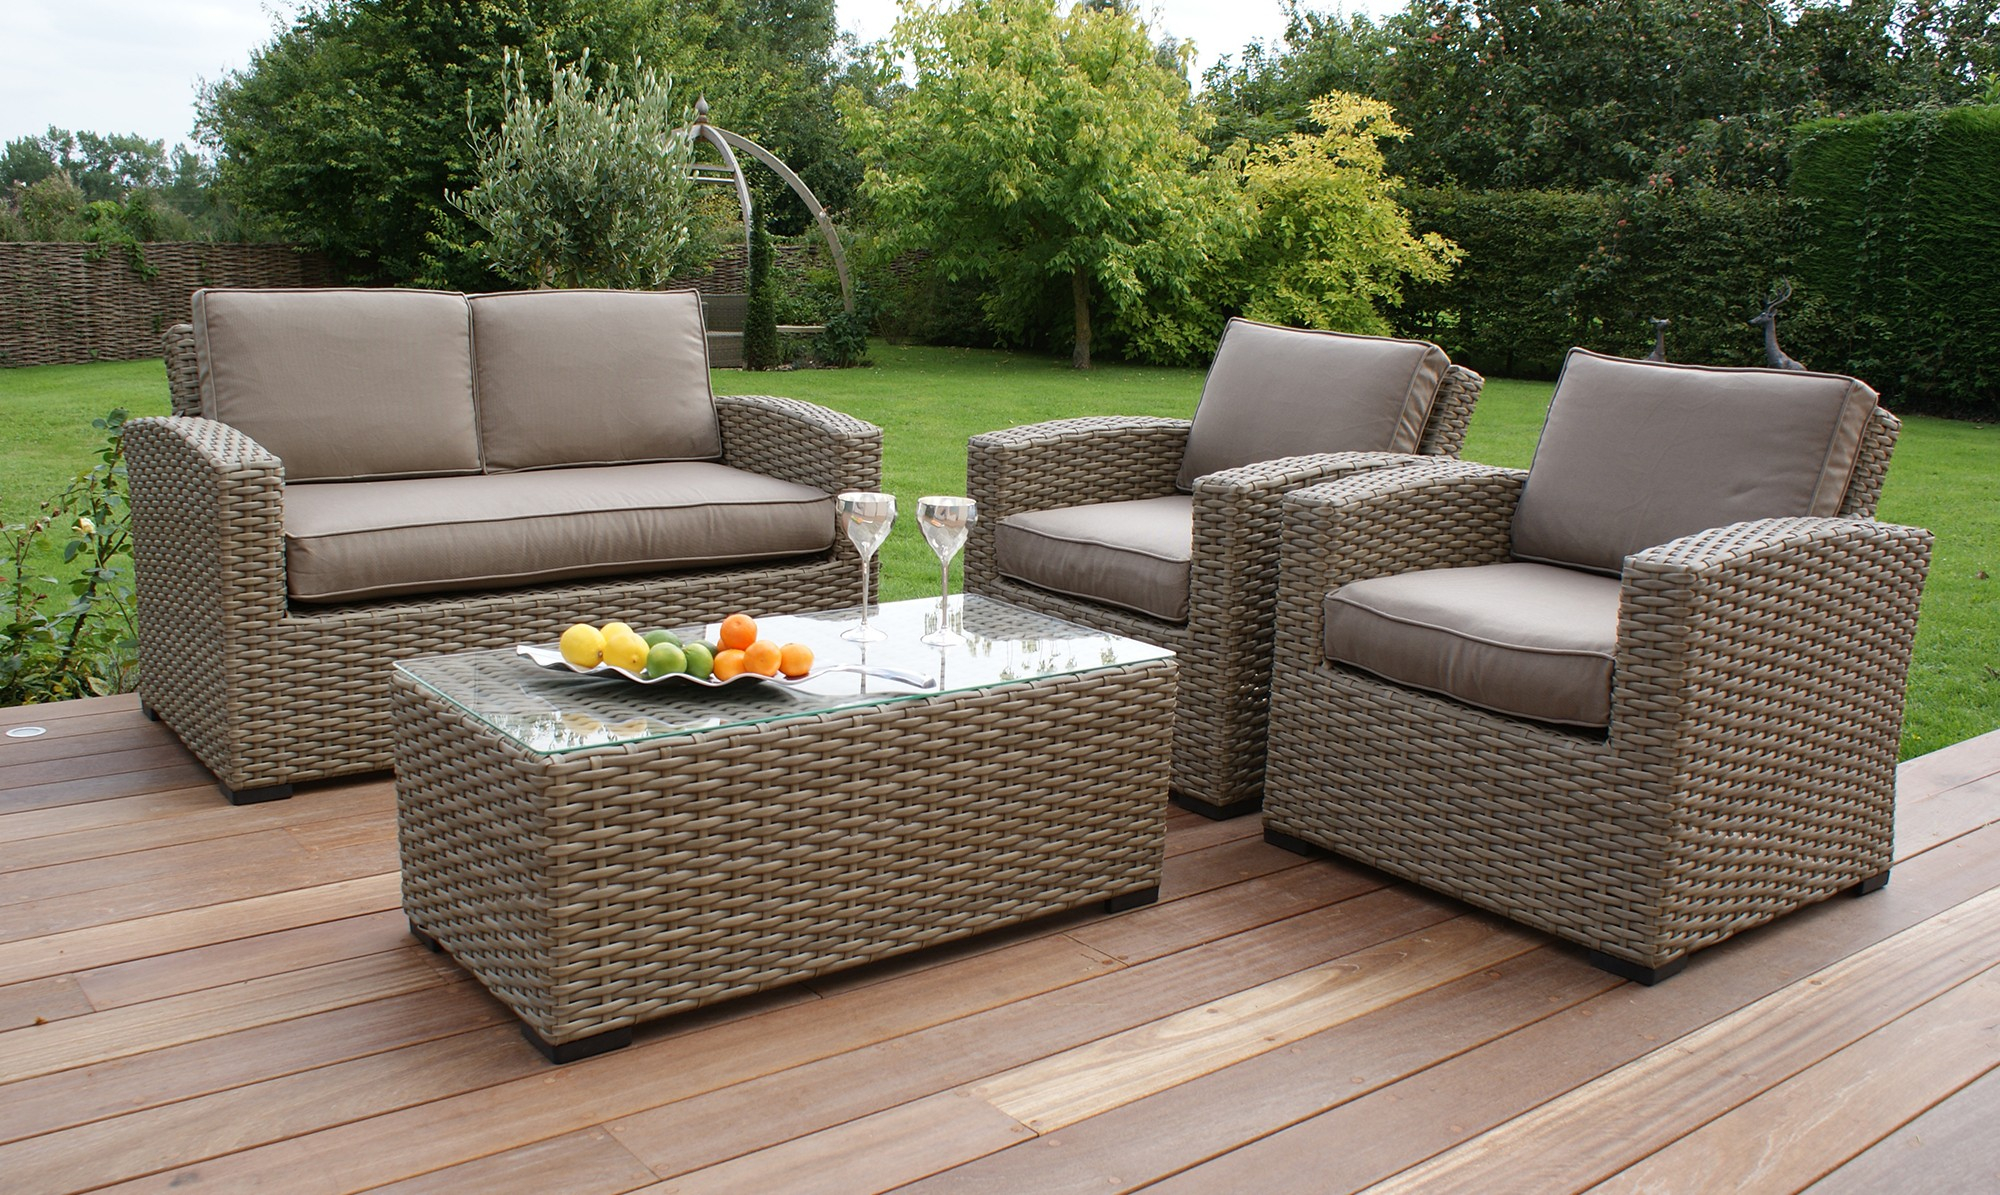 Tips For Buying Rattan Garden Furniture That Will Last with dimensions 2000 X 1195